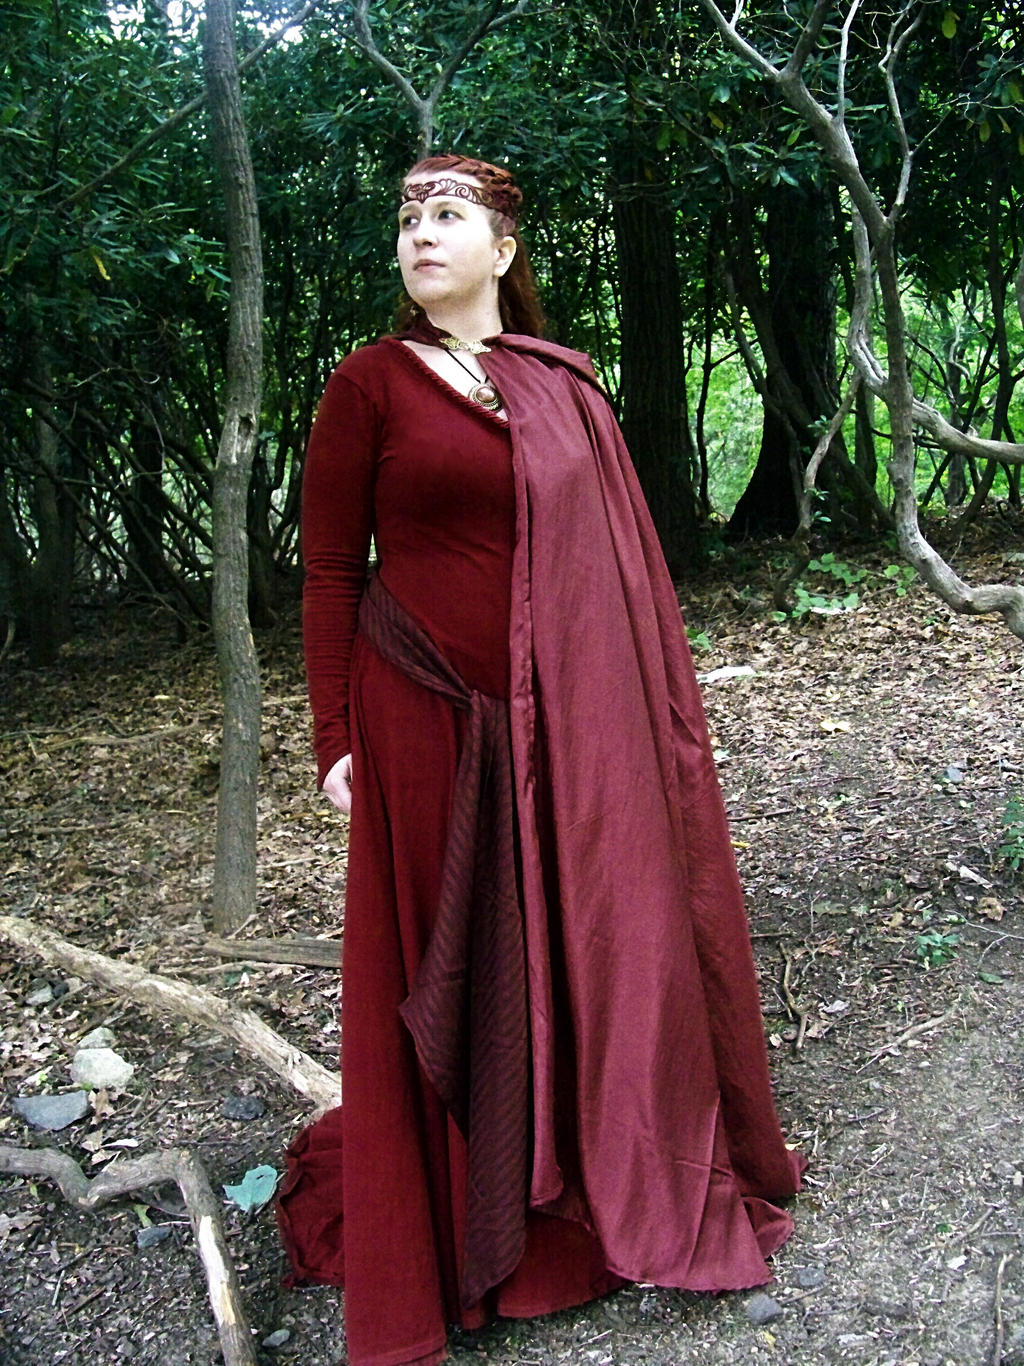 Melisandre Cosplay--The Red Priestess by celticbard76 on DeviantArt